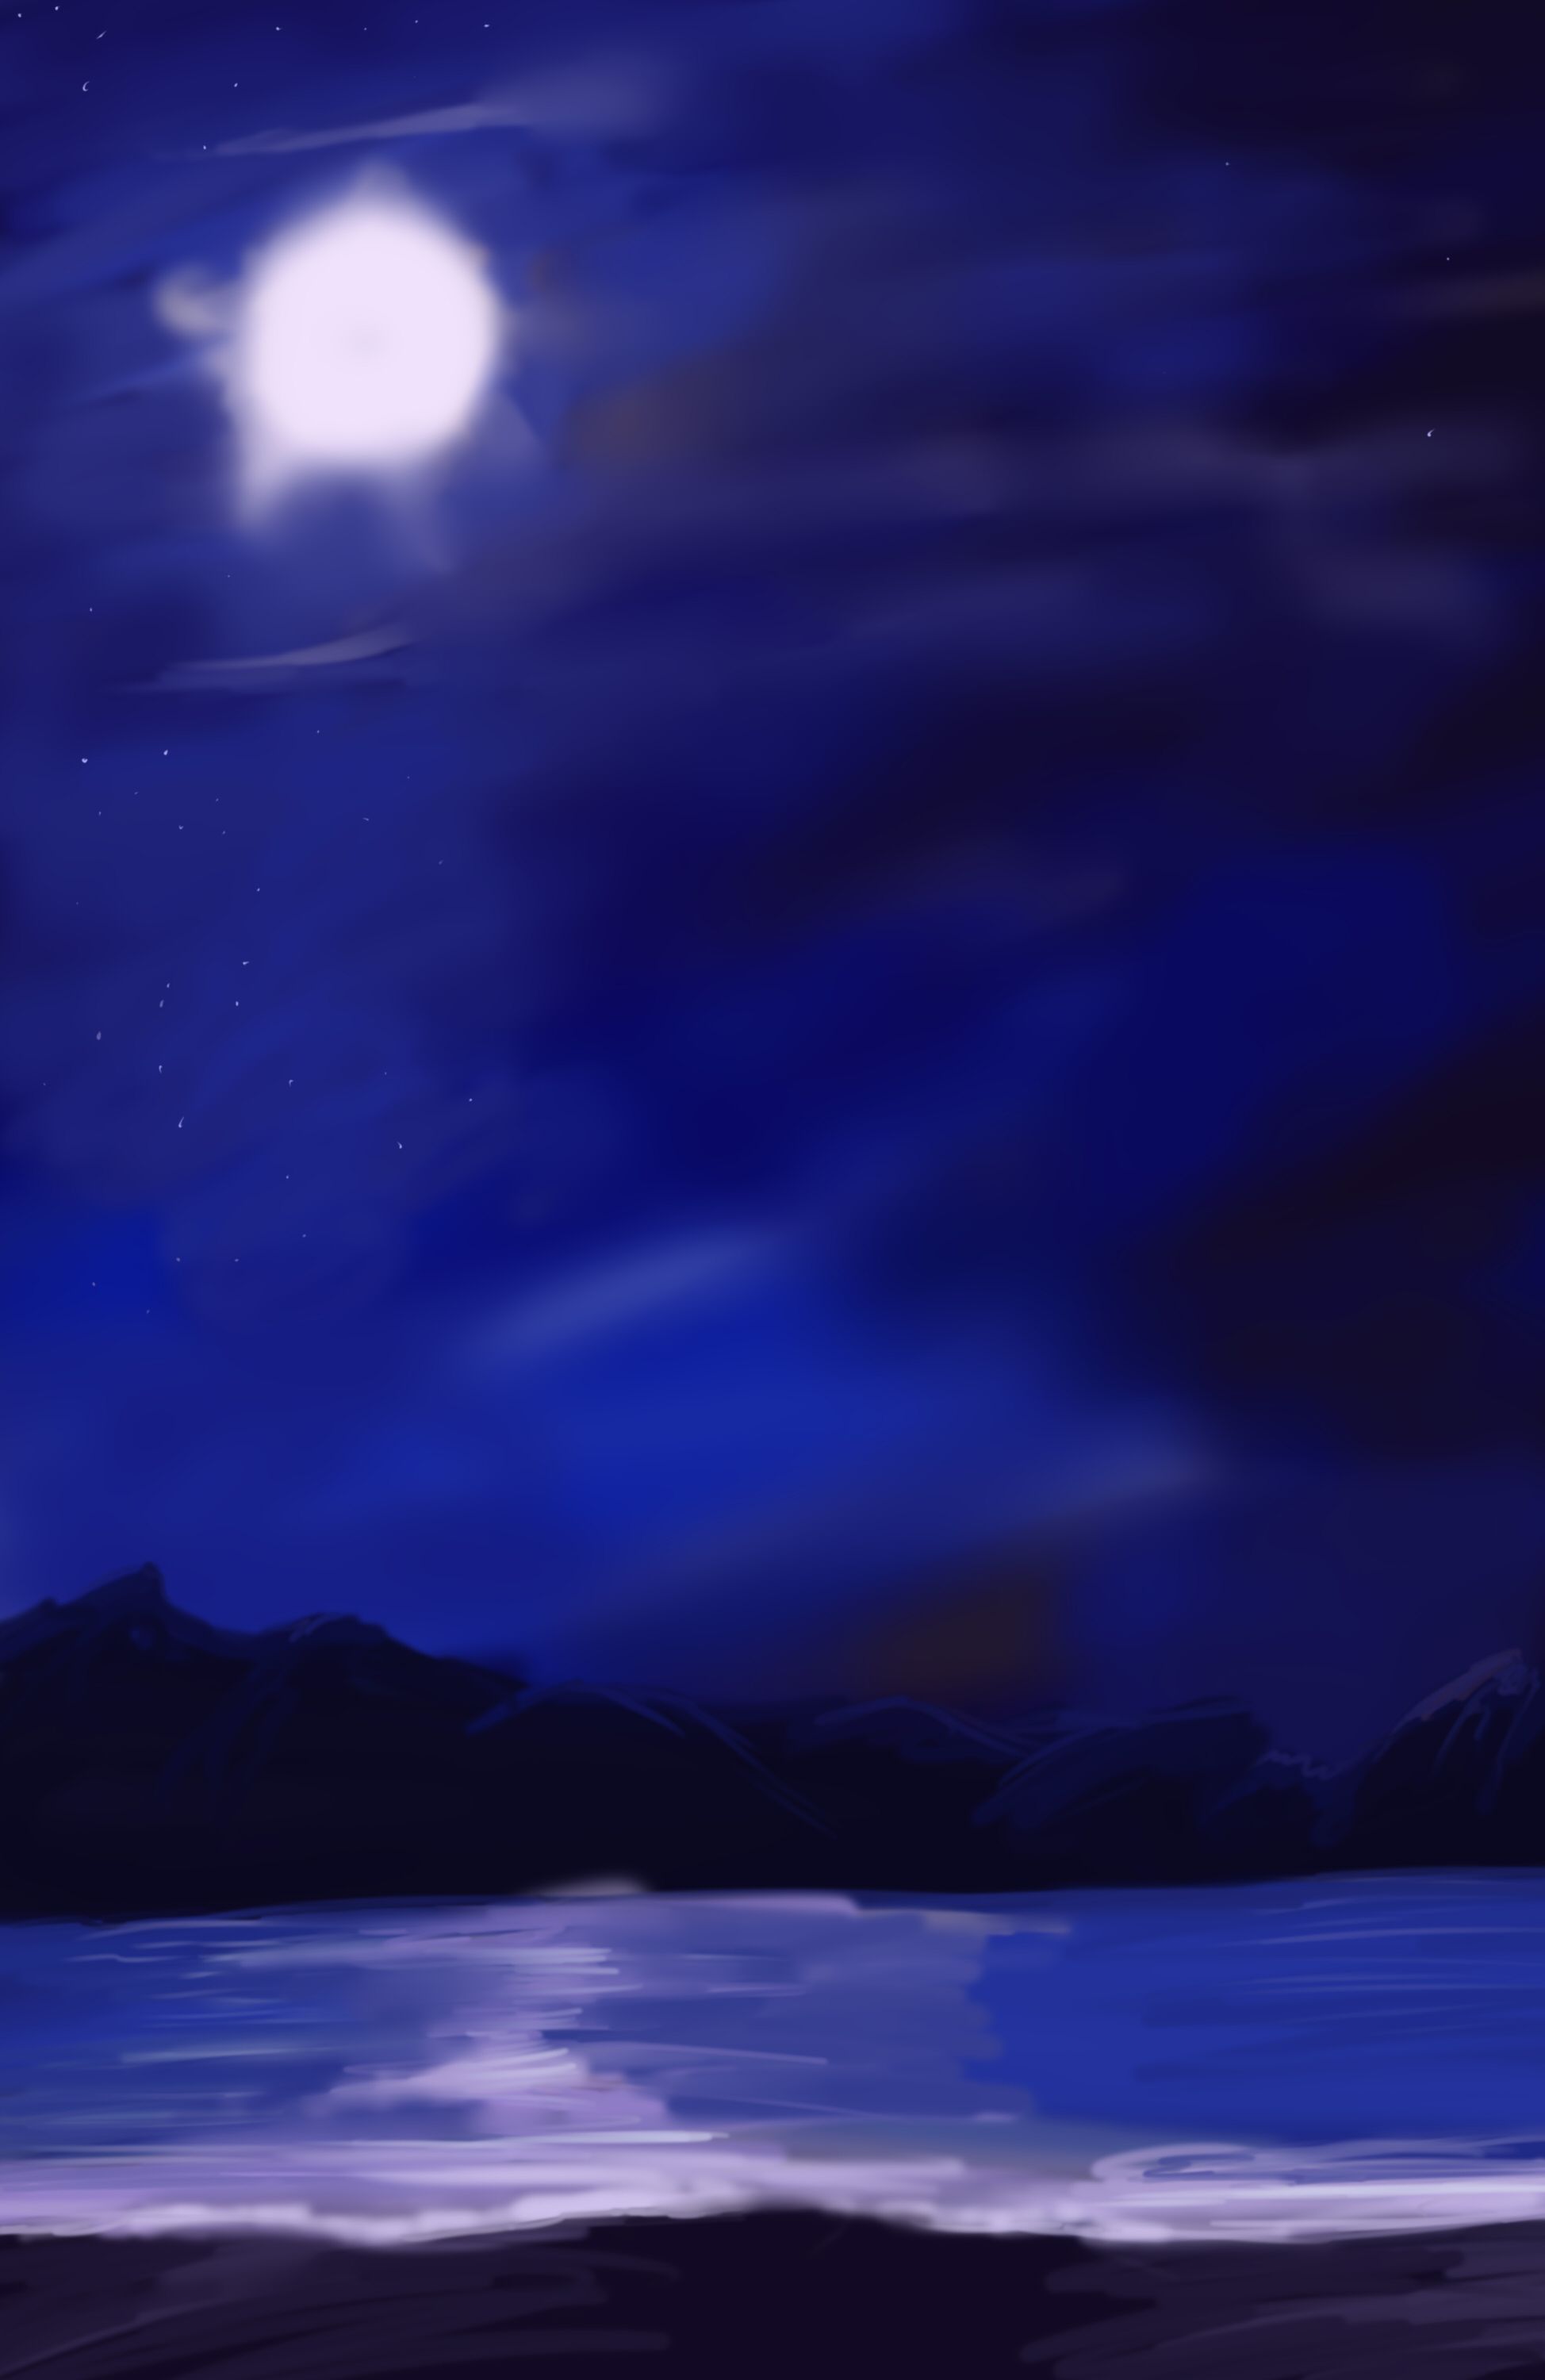 Free download Anime Night Beach Background by wbd [1948x3000] for your Desktop, Mobile & Tablet. Explore Beach At Night Wallpaper. Beach Night HD Wallpaper, Night Ocean Wallpaper, Poolside Night HD Wallpaper